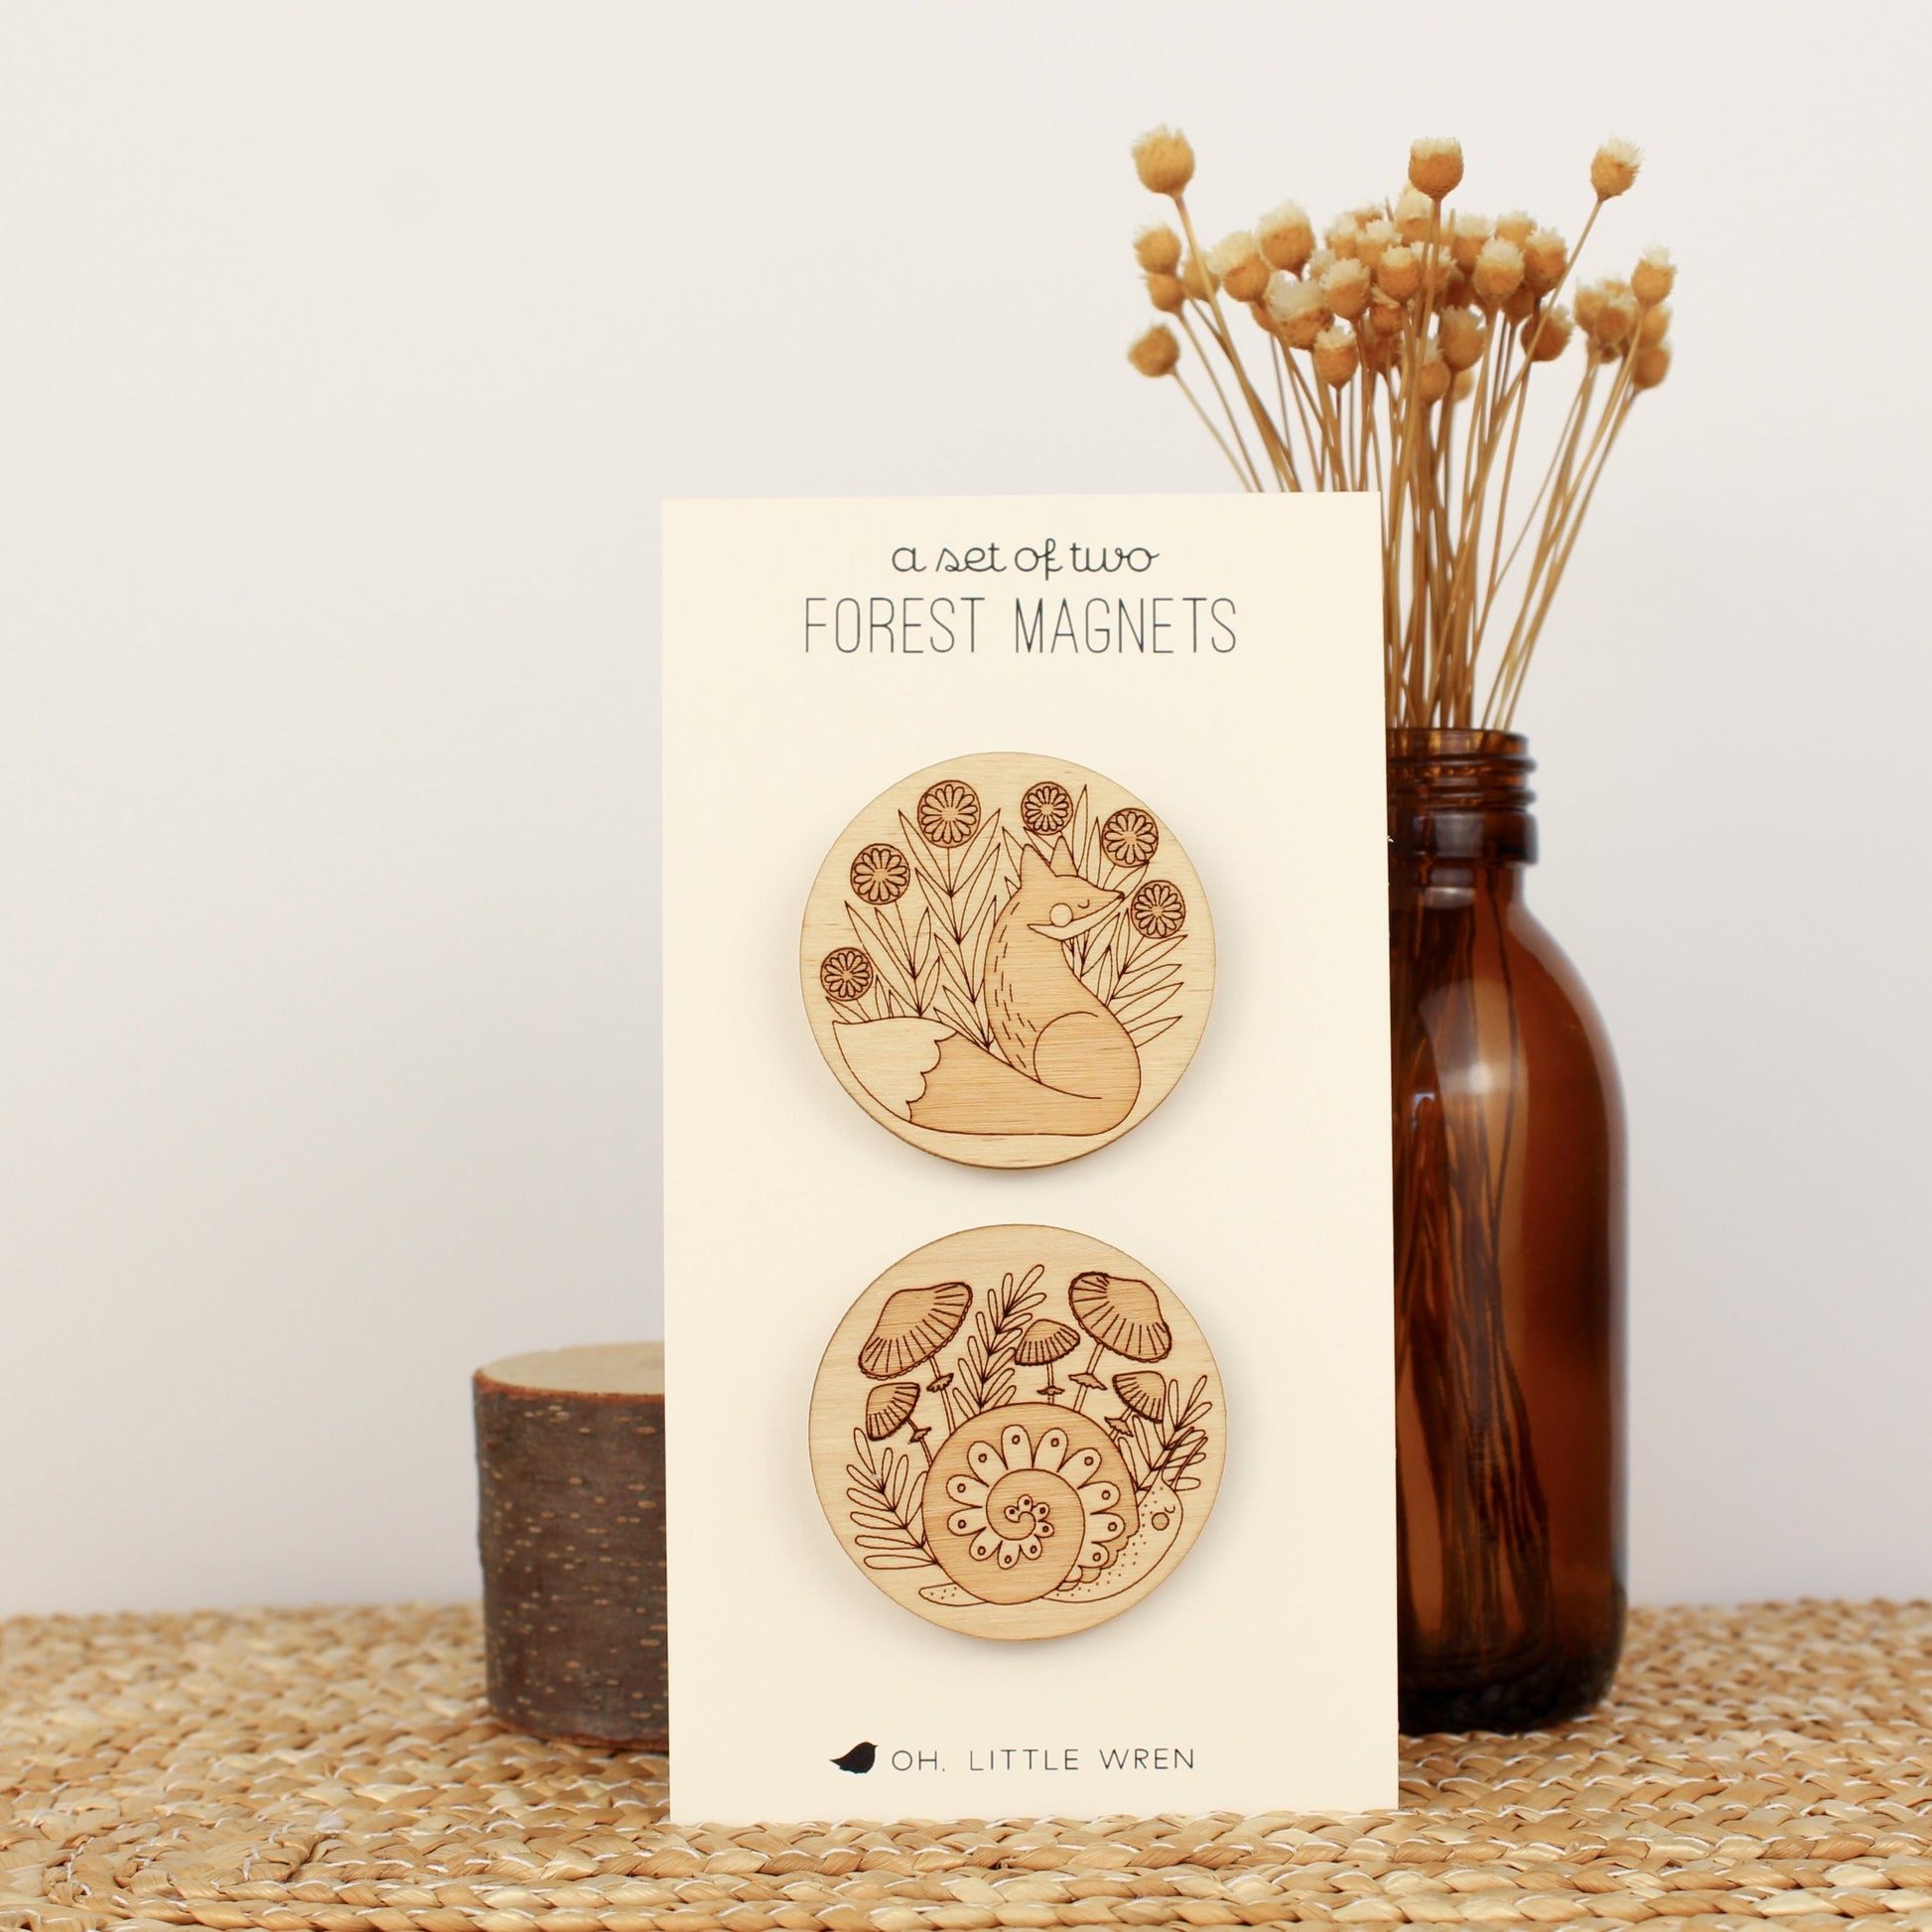 pair of circular wooden magnets, one with a fox surrounded by flowers and the other with a snail and mushrooms.